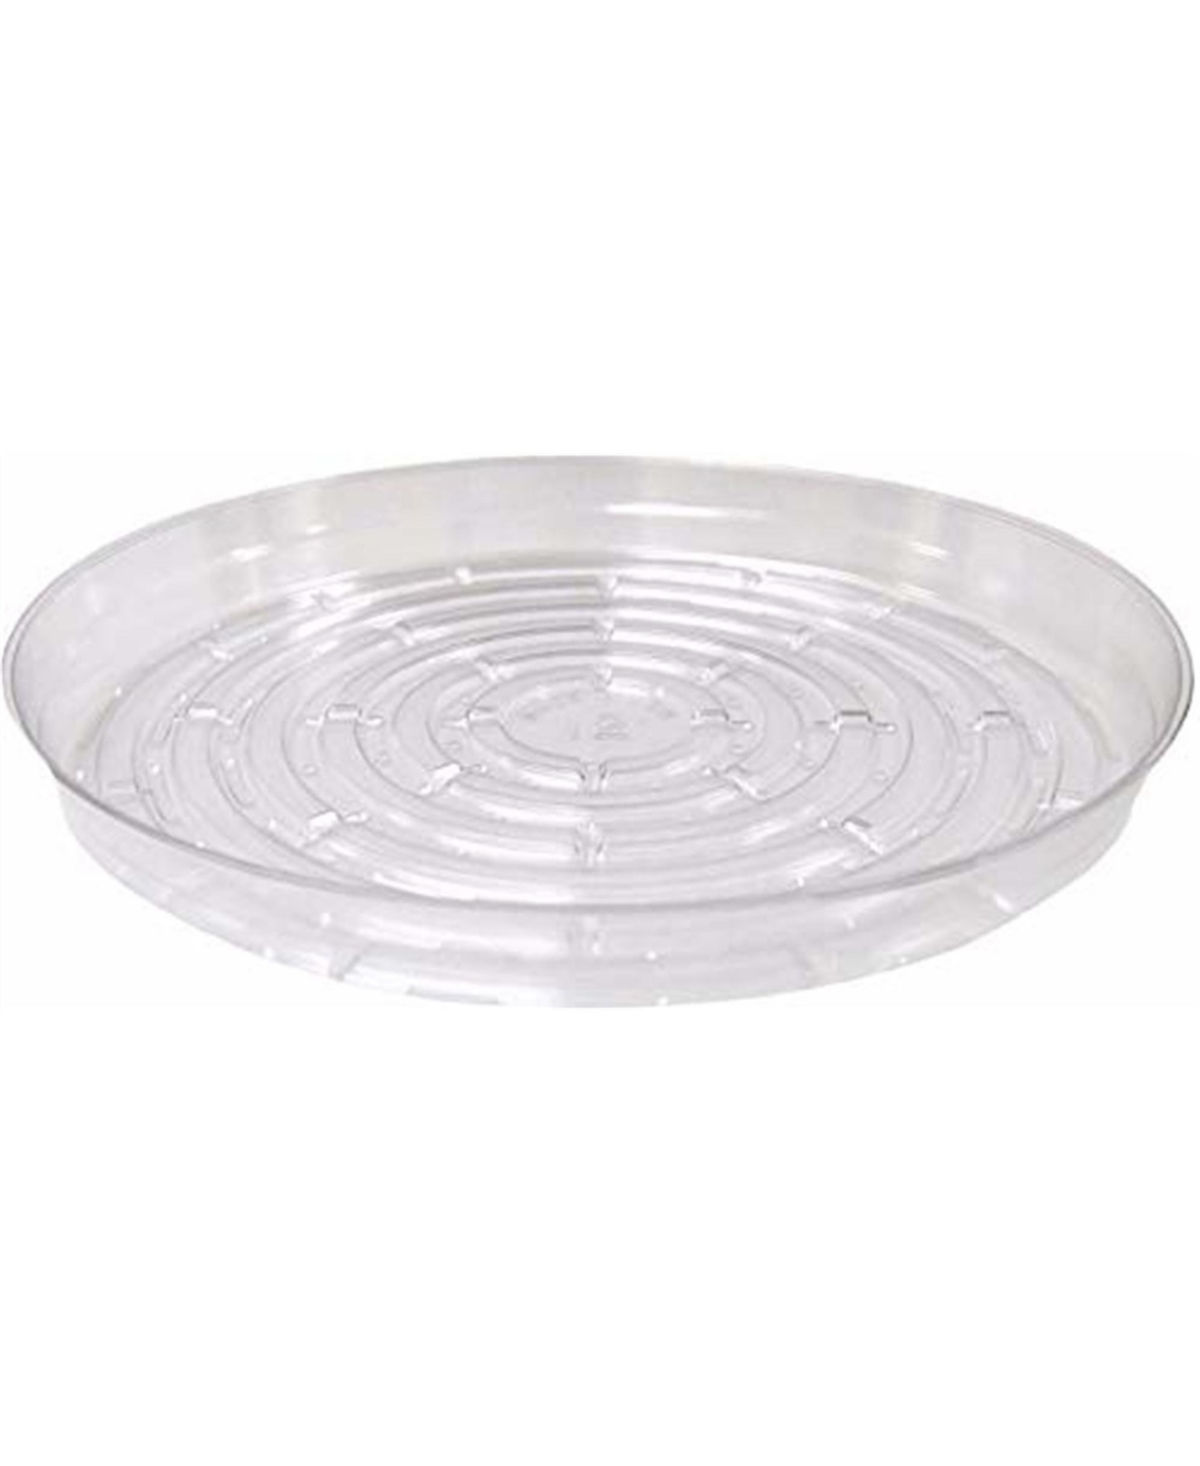 Curtis Wagner CW1200N Round Clear Vinyl 12 Plant Saucer, Pack of one - Clear